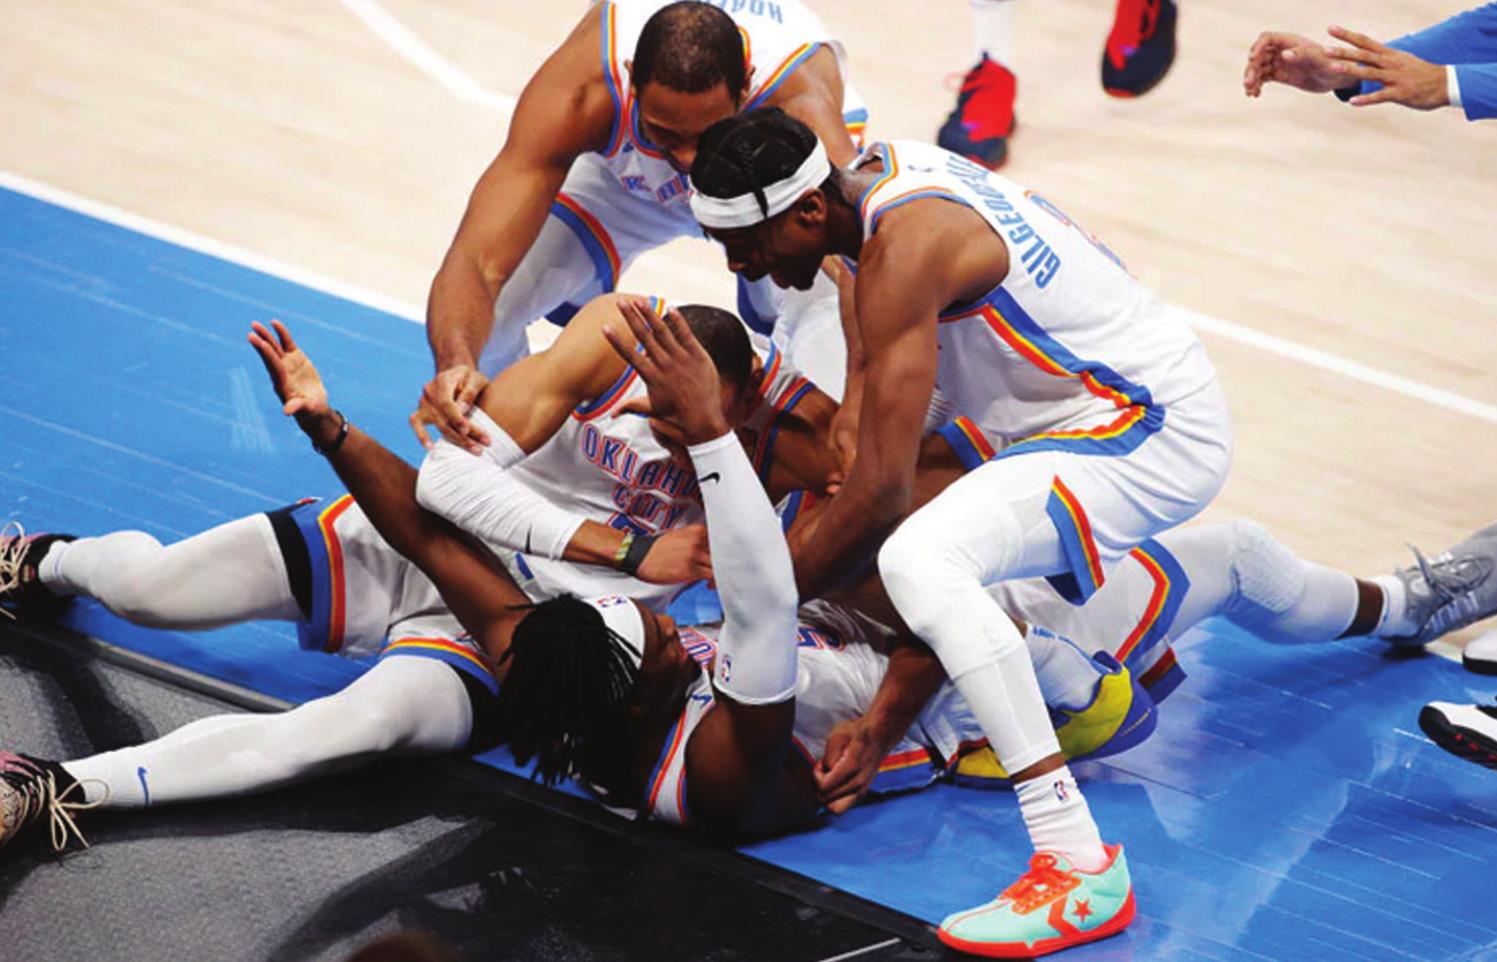 Oklahoma City Thunder players celebrate a last-second win against San Antonio Wednesday night, as Oklahoma City won the game 102-99. The team announced its second-half schedule this week, which opens March 11, with a home game against the Dallas Mavericks. Provided